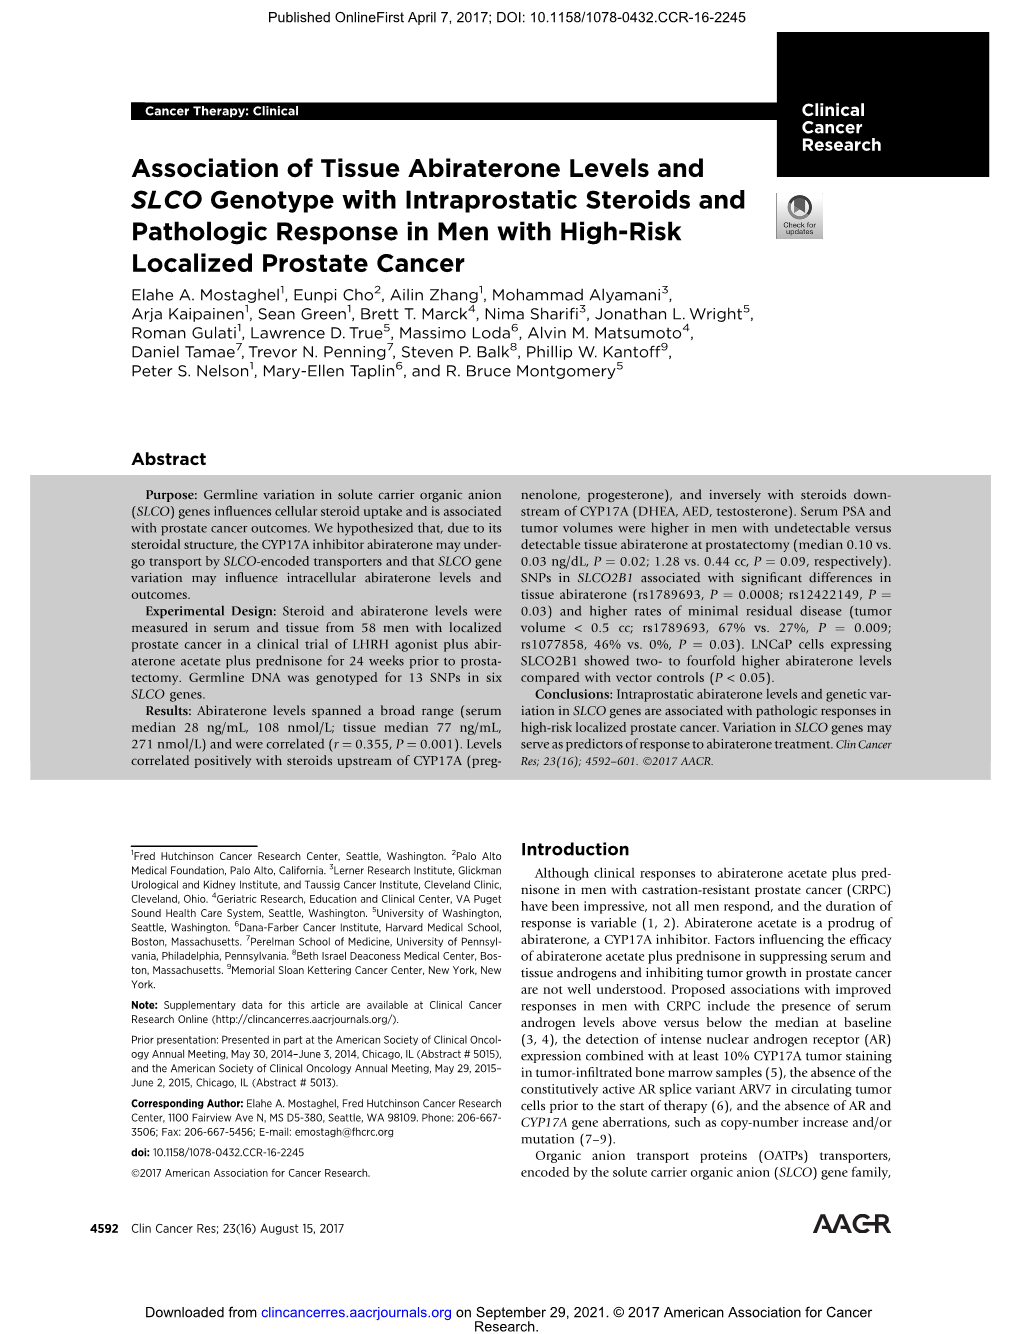 Association of Tissue Abiraterone Levels and SLCO Genotype With